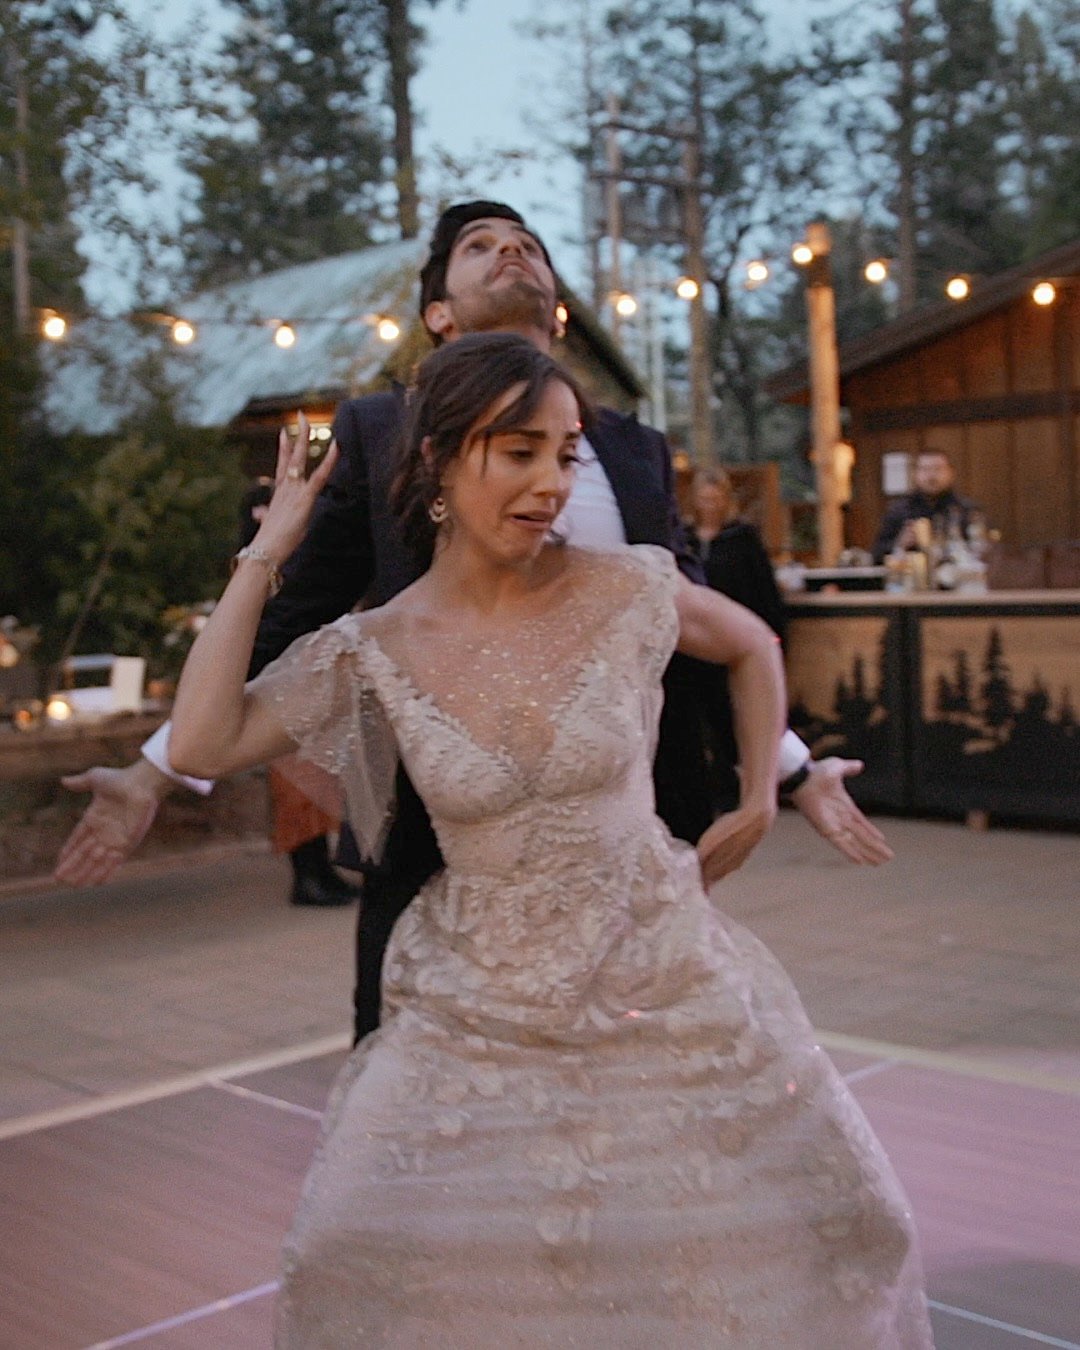 couple dancing at their wedding